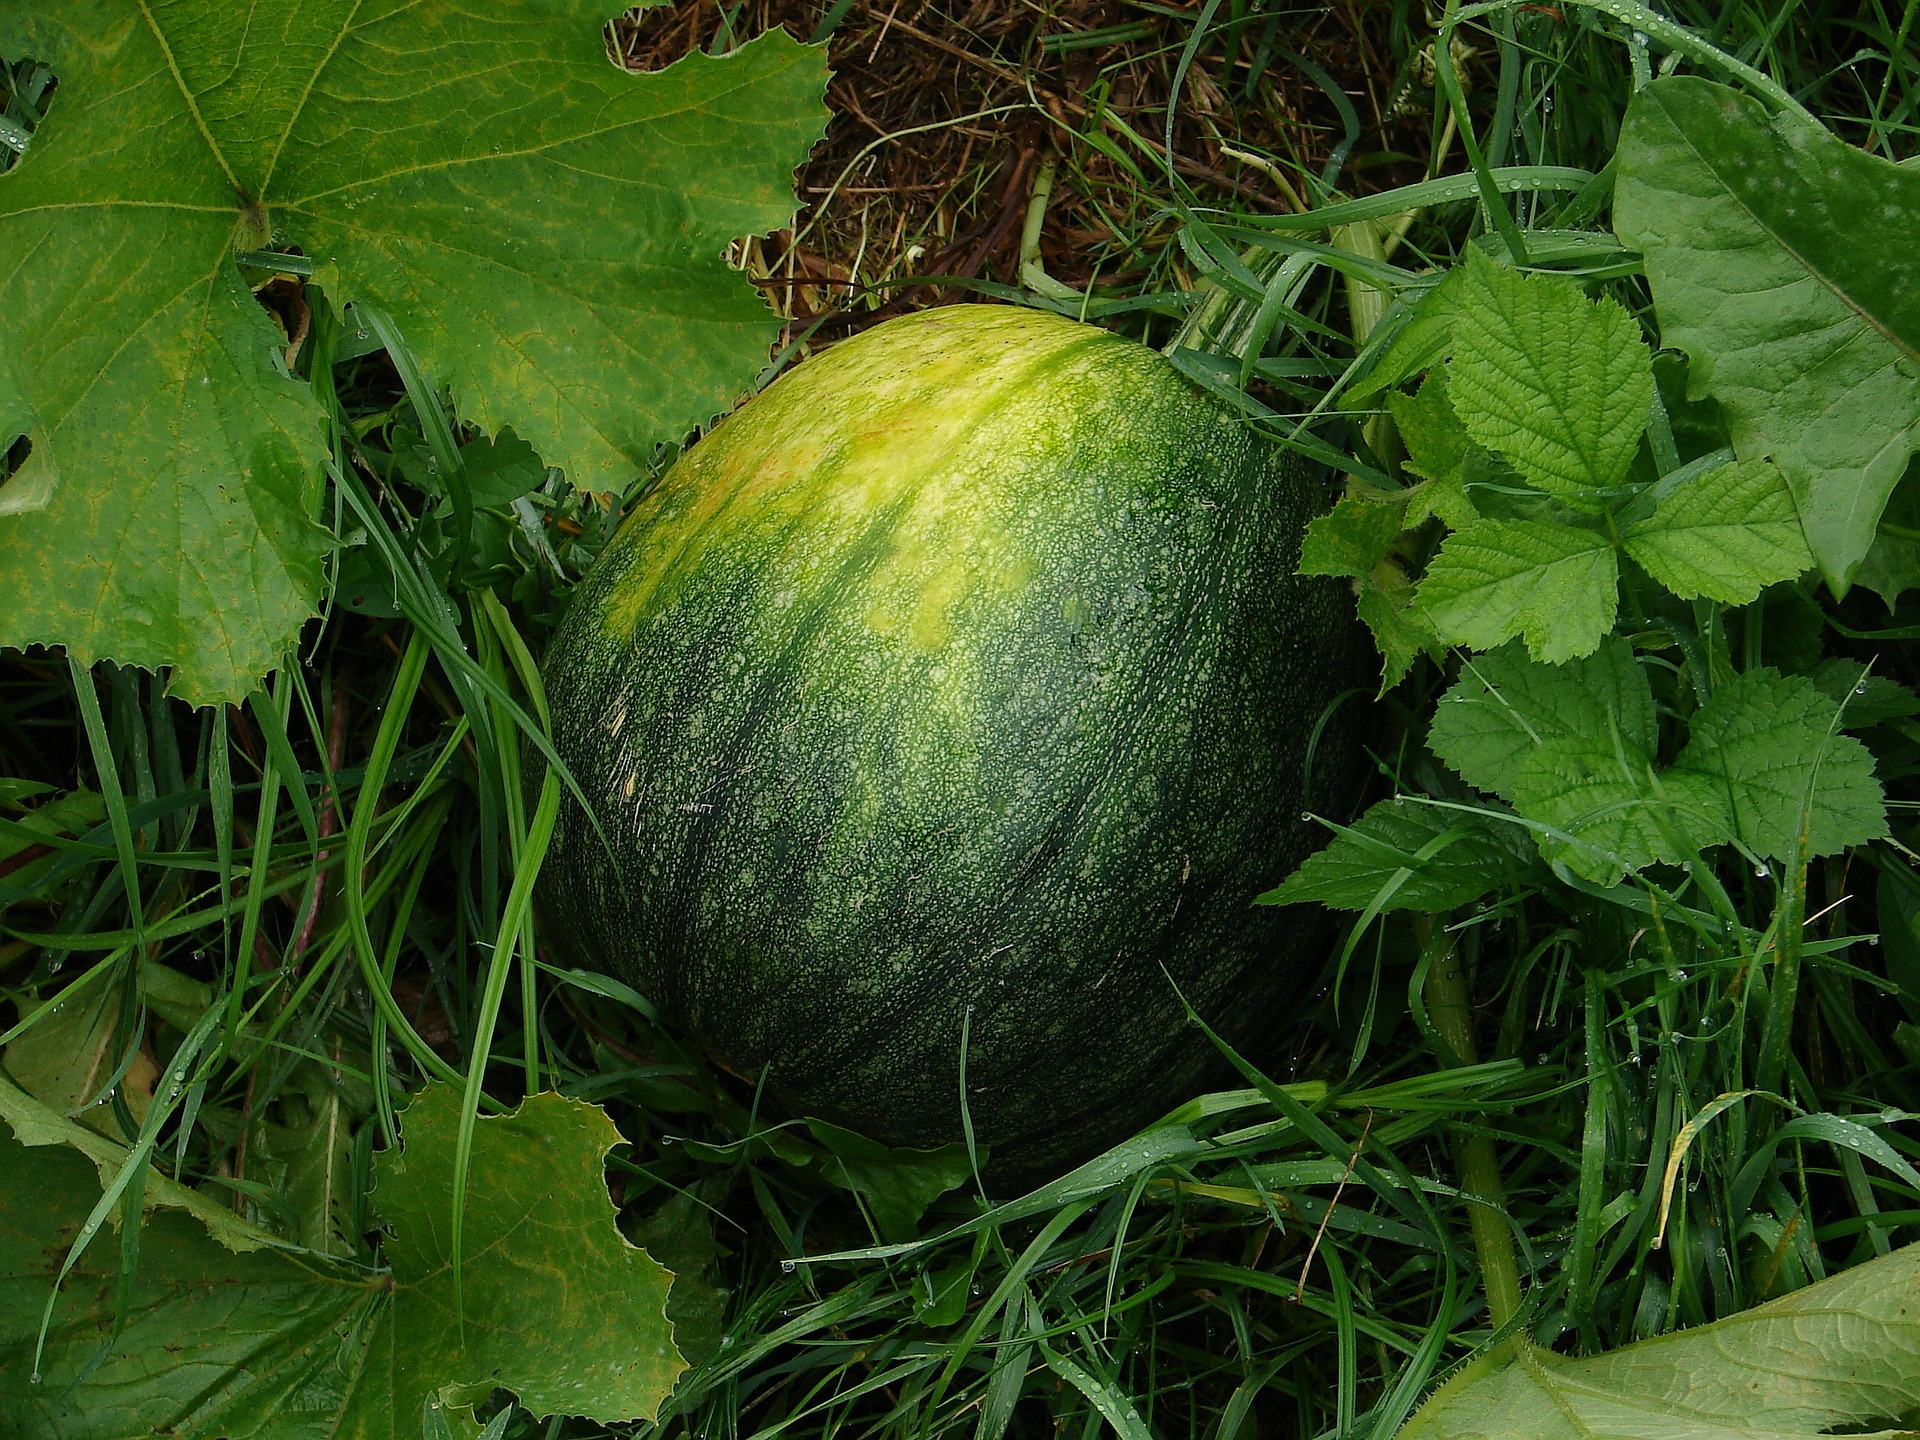 Kos Watermelons and the Melon Island